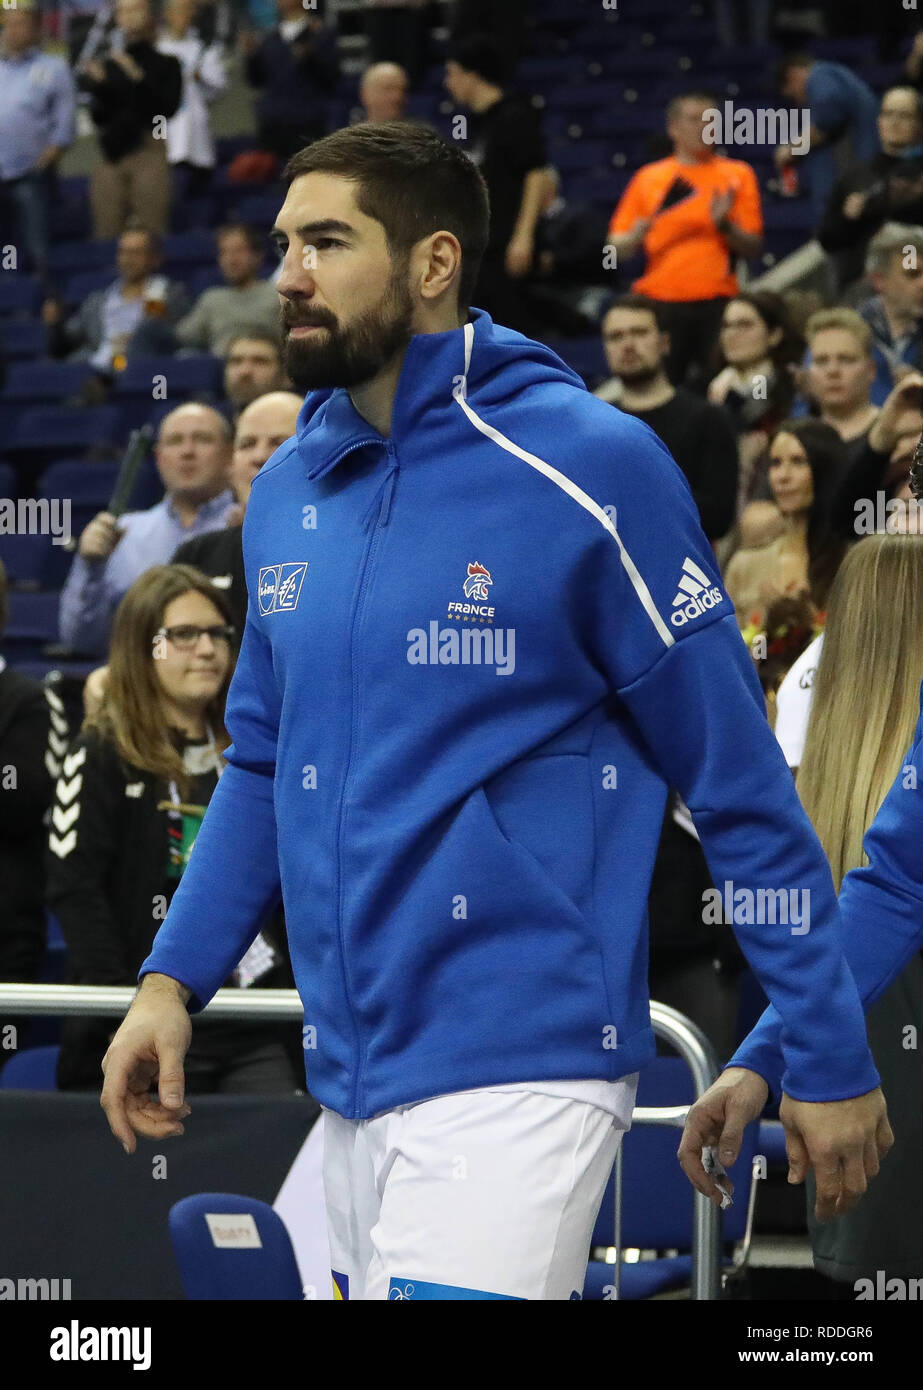 Berlin, Germany. 17th January, 2019. Nikola Karabatic (France) during the IHF Men's World Championship 2019, Group A handball match between France and Russia on January 17, 2019 at Mercedes-Benz Arena in Berlin, Germany - Photo Laurent Lairys / MAXPPP Credit: Laurent Lairys/Agence Locevaphotos/Alamy Live News Stock Photo